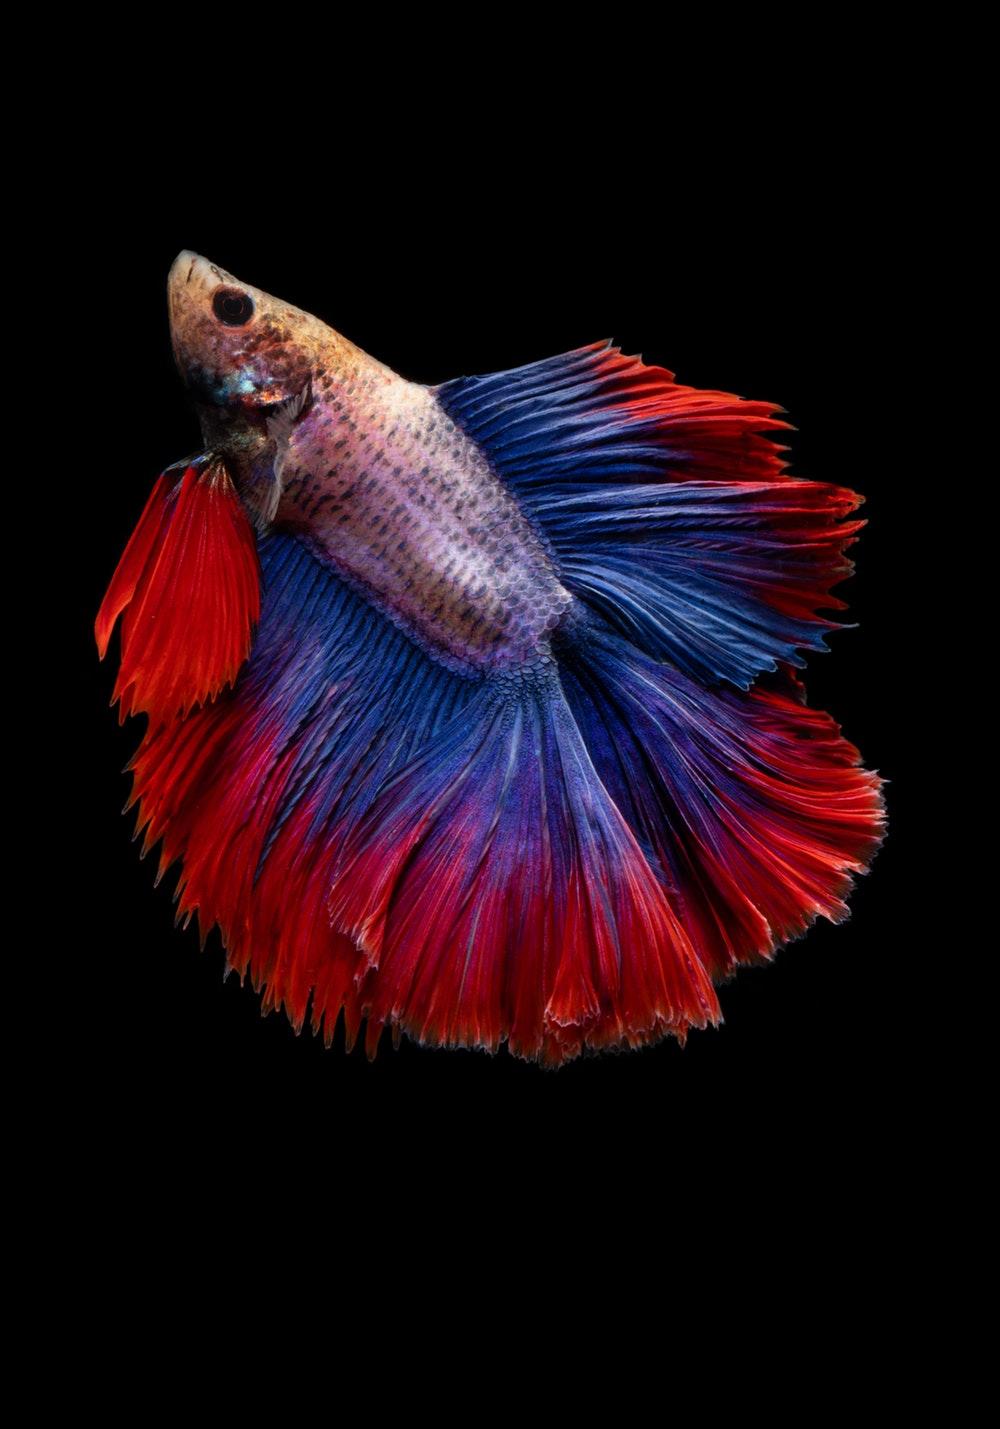 Beautiful Fish Picture. Download Free Image